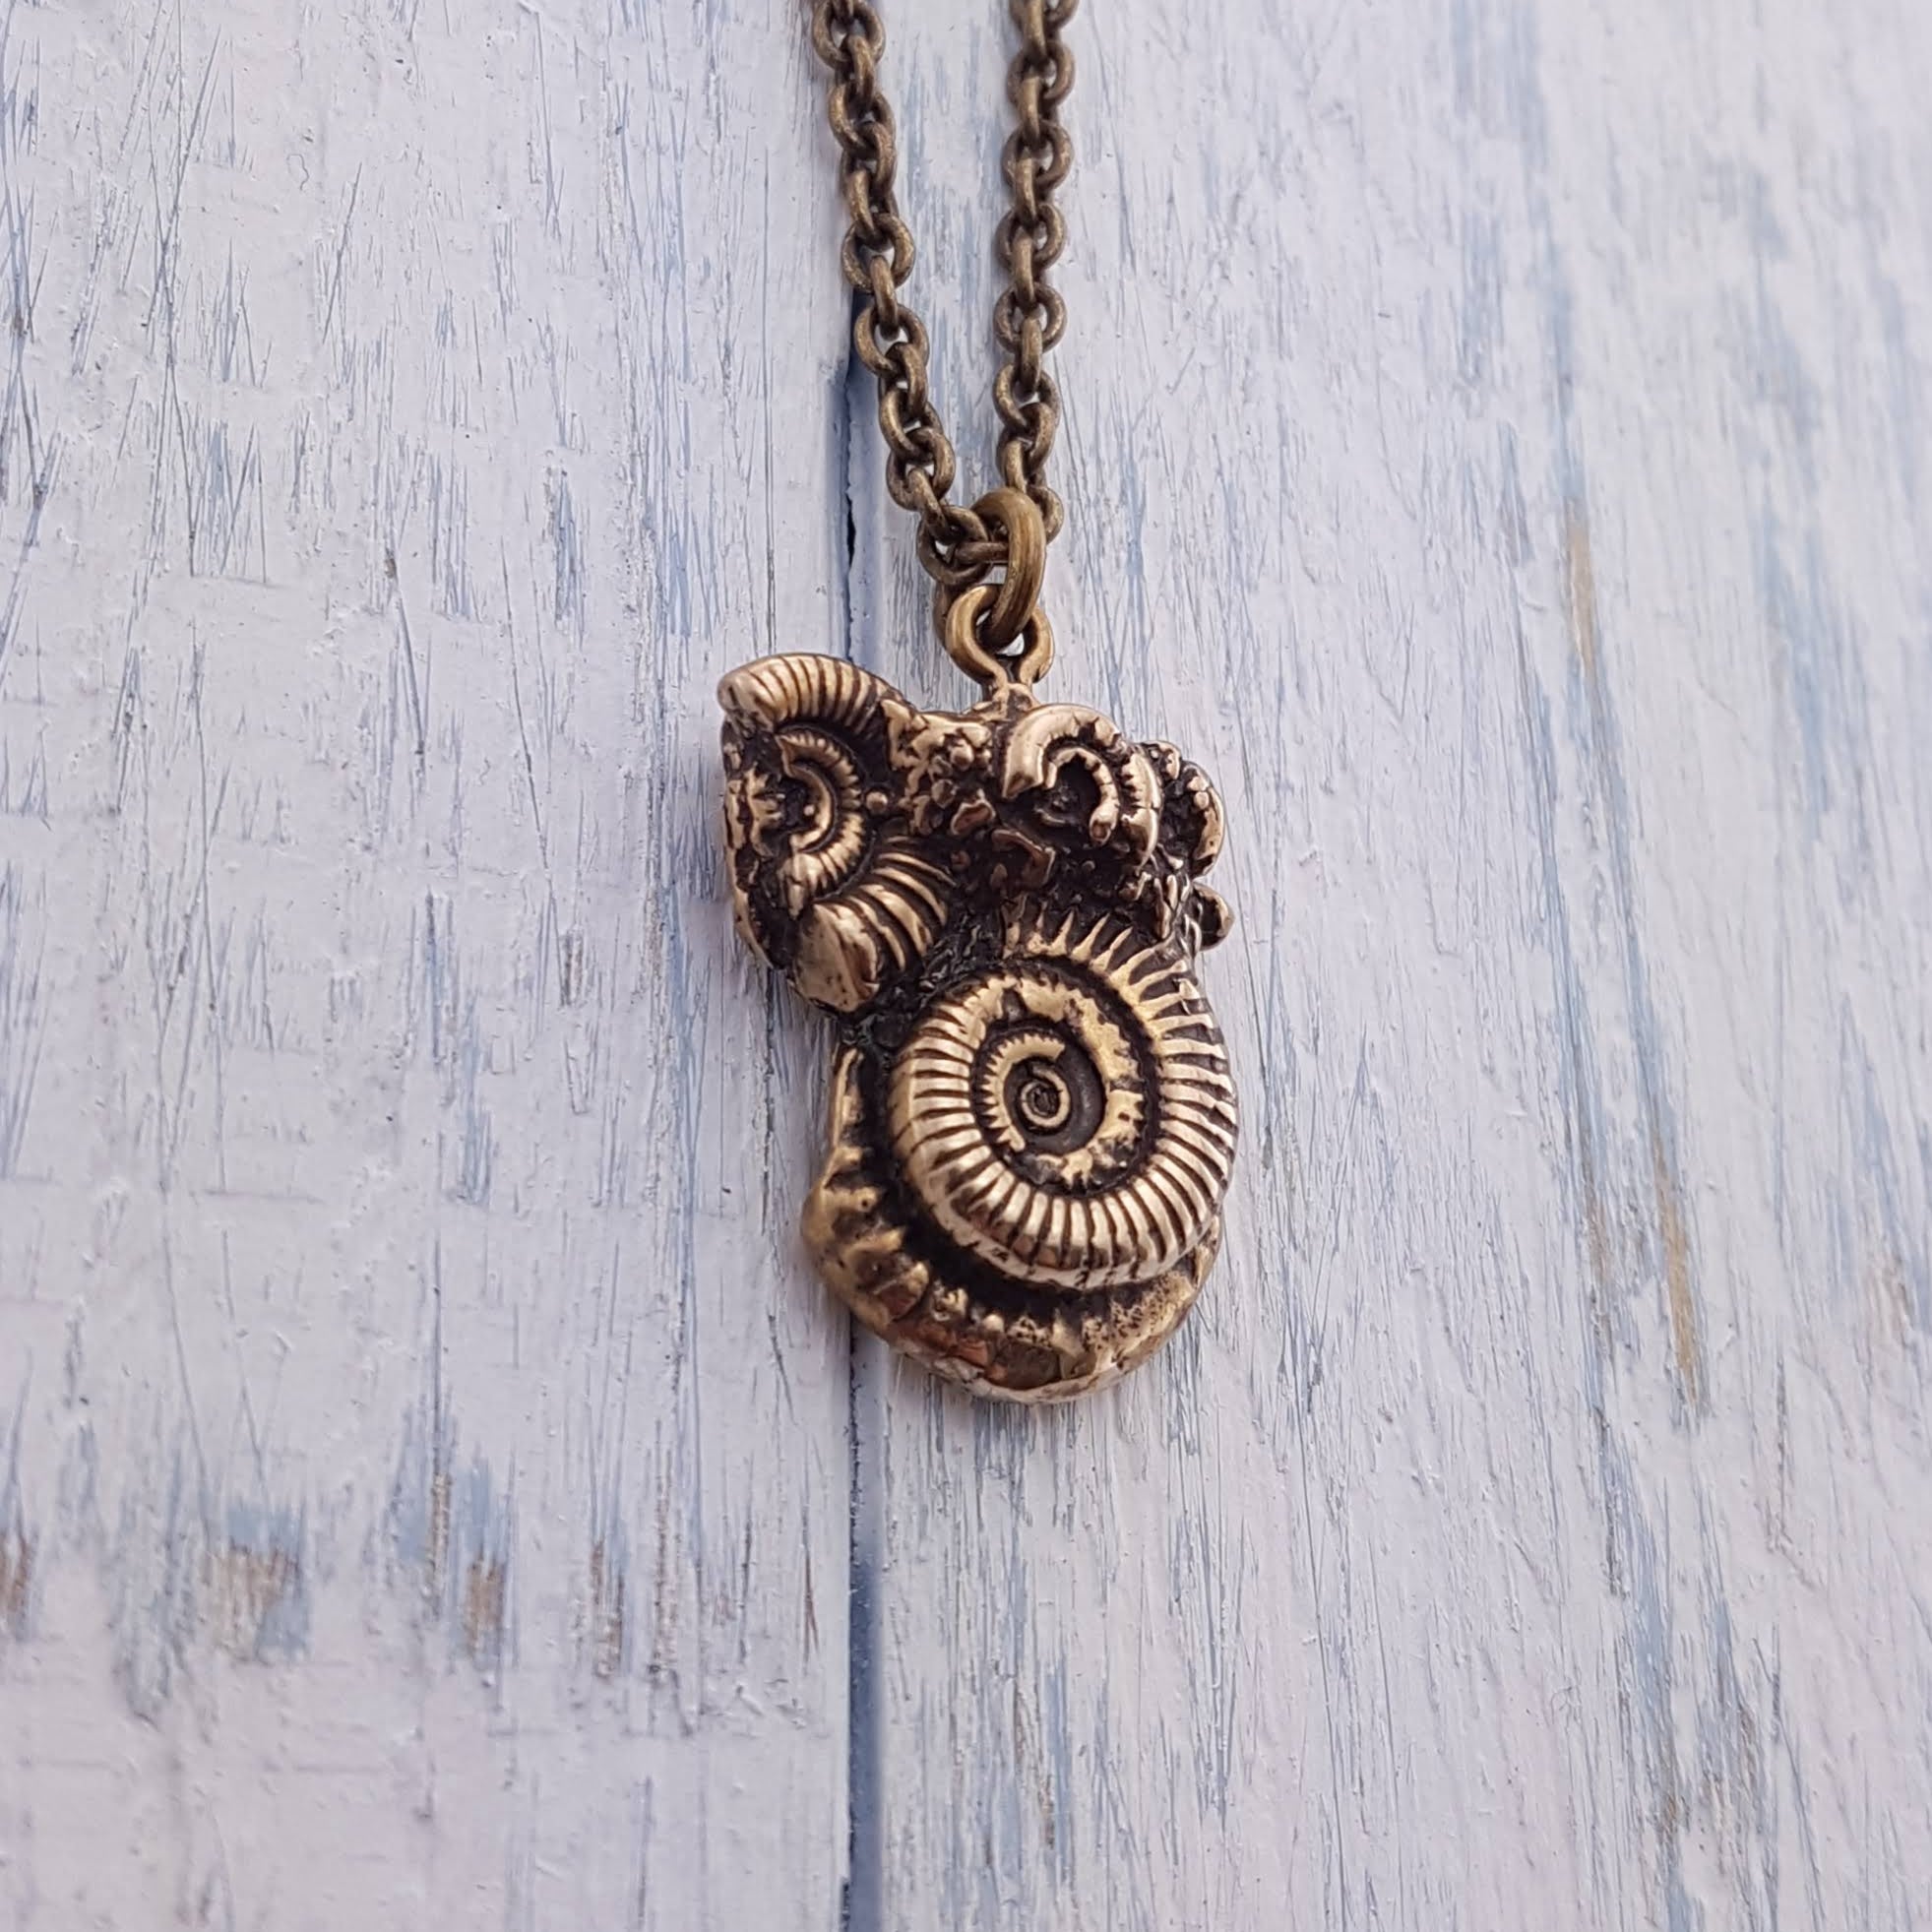 Ammonites Fossil Necklace - Gwen Delicious Jewelry Designs